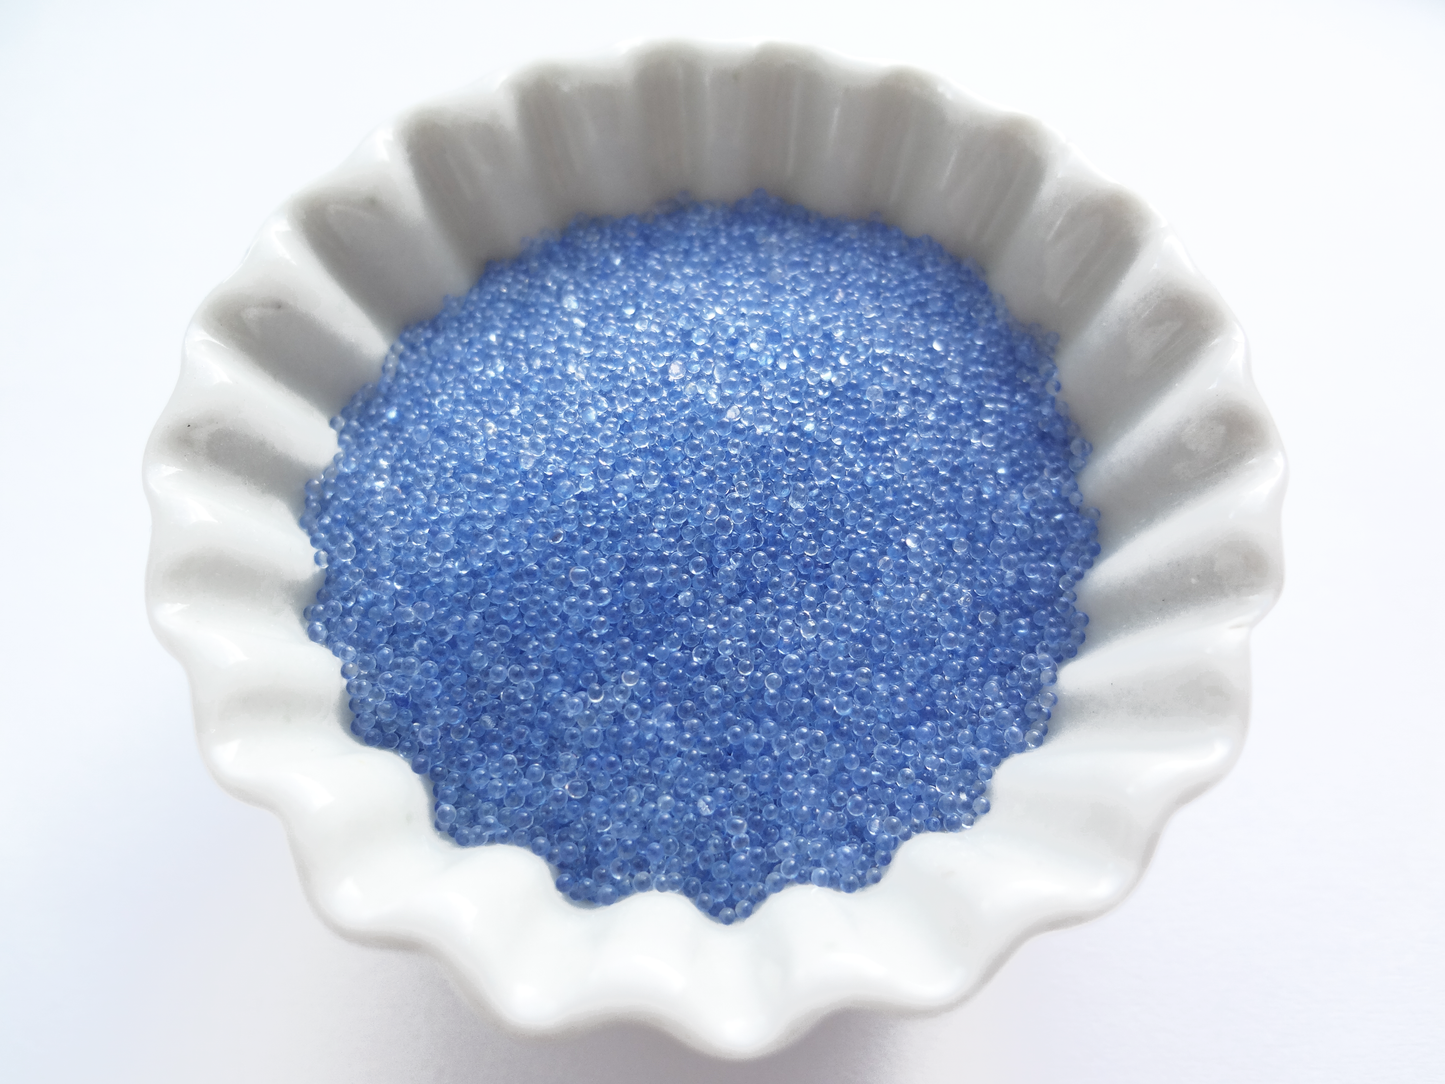 Load image into Gallery viewer, 0.6-0.8mm PERIWINKLE BLUE Transparent Microbeads
